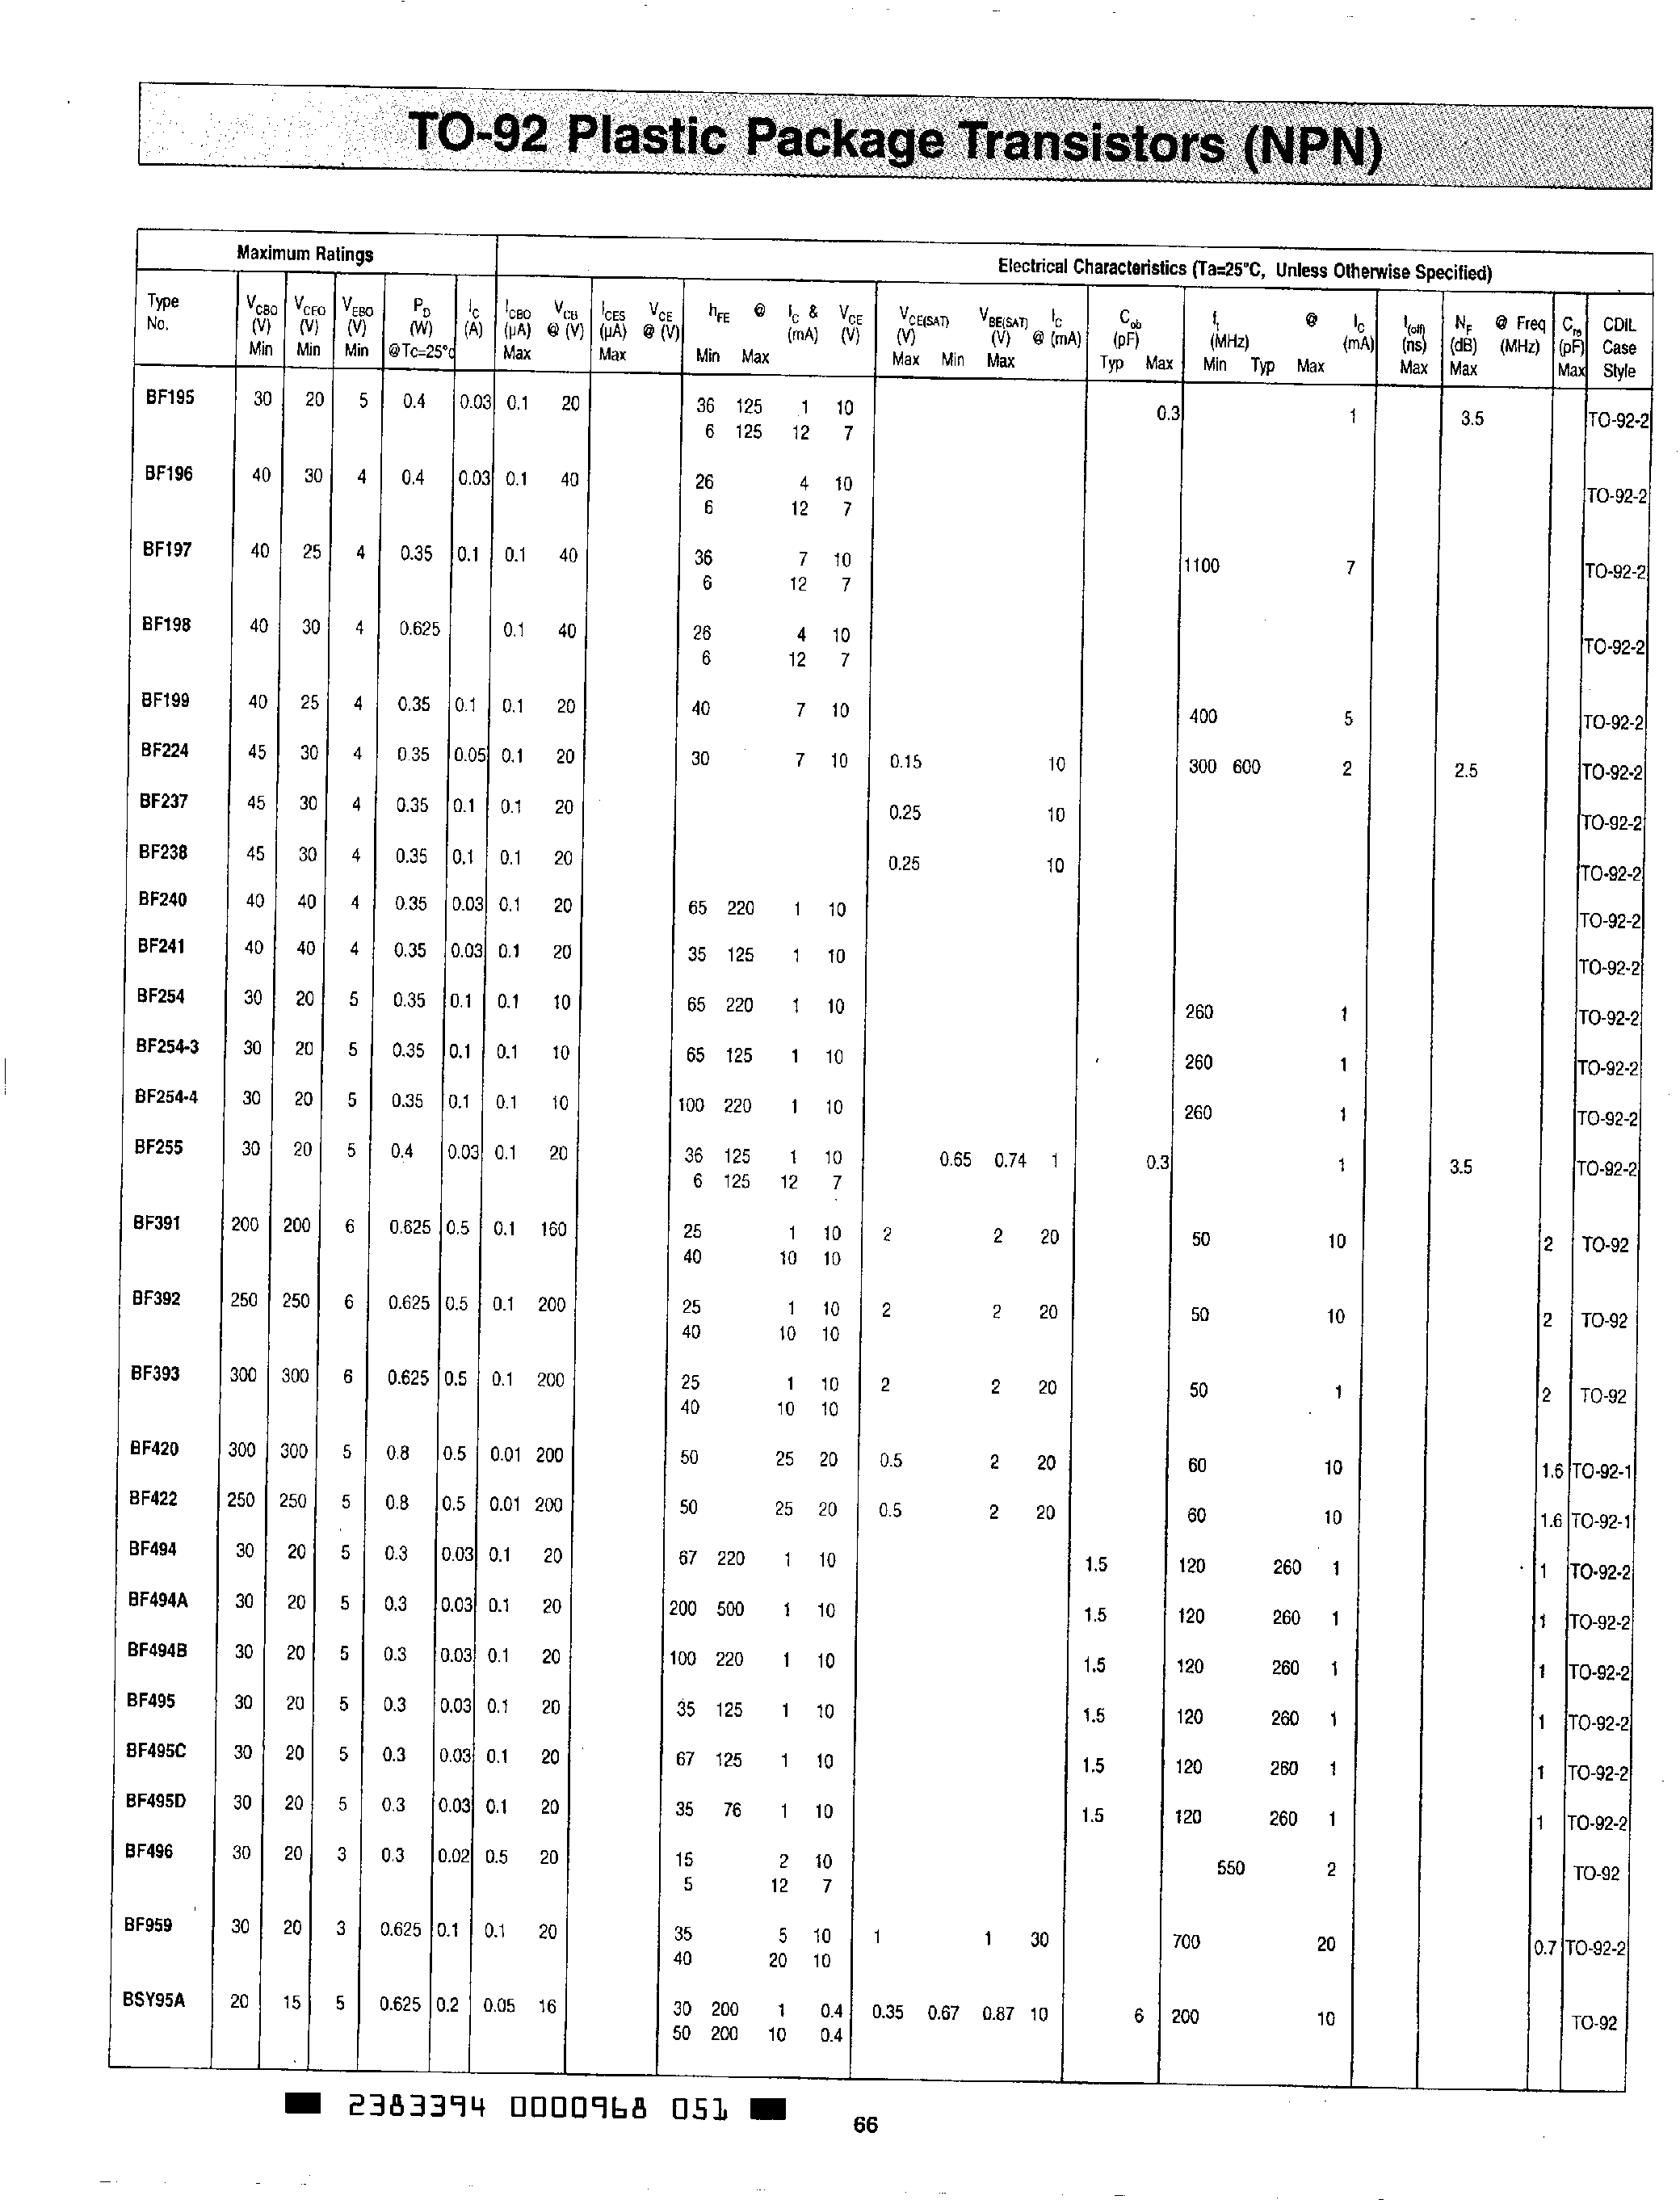 Datasheet BF195 - TO-92 Plastic Package Transistors page 1